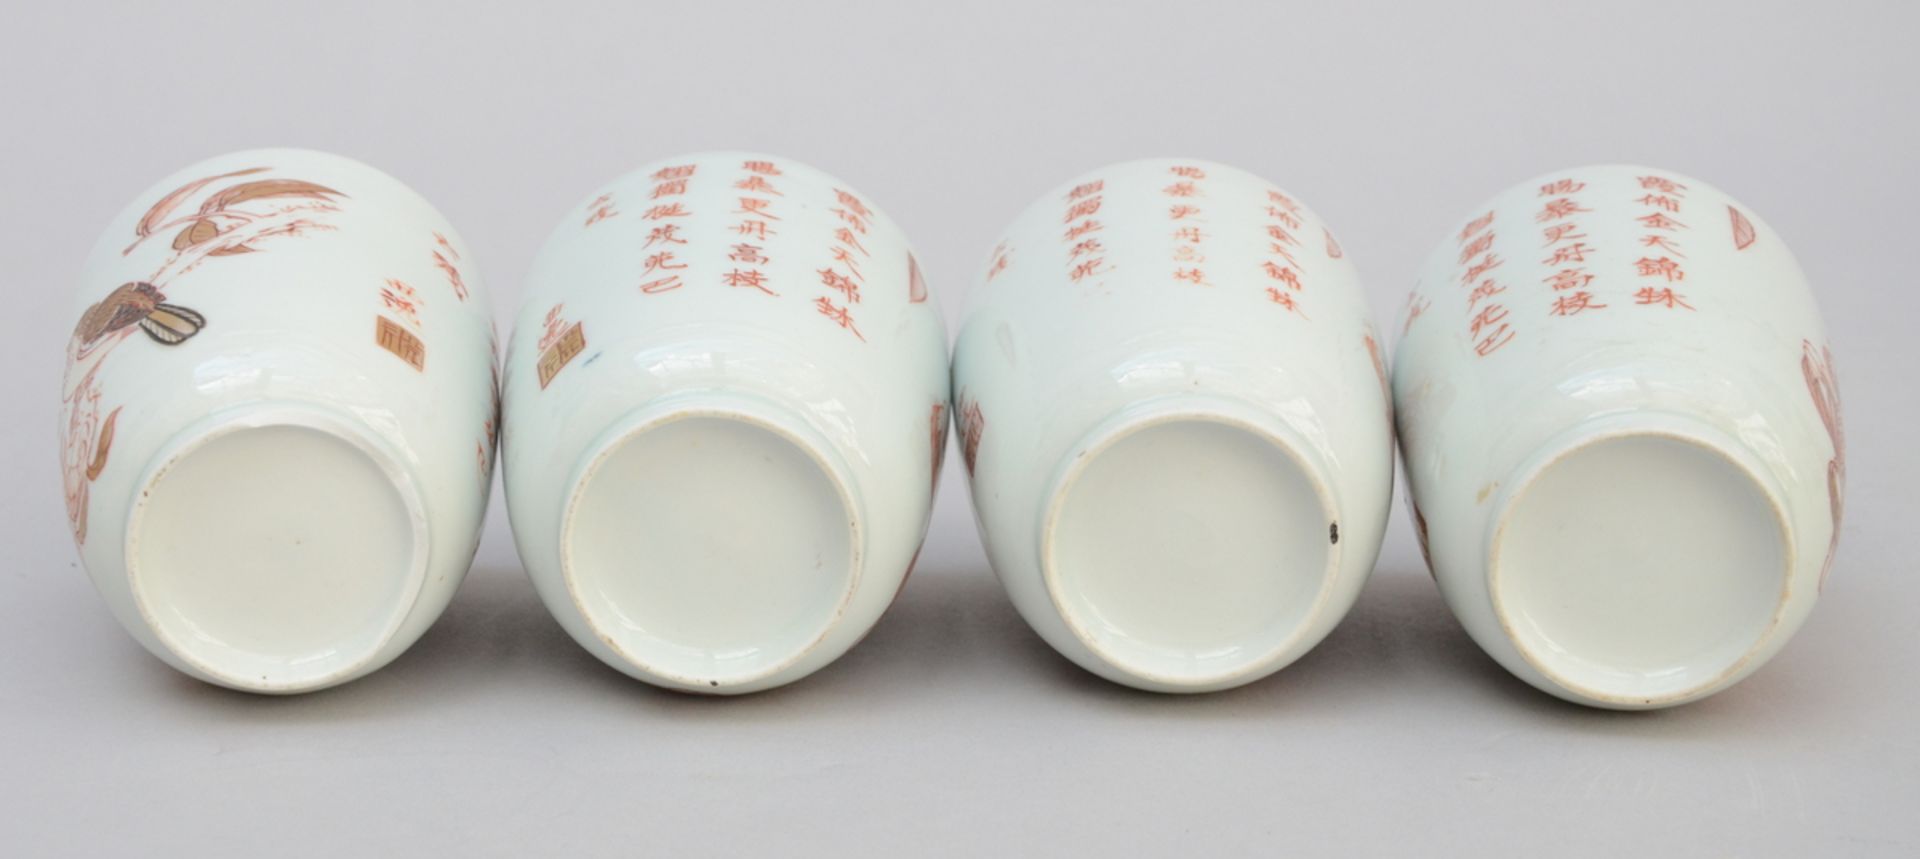 A set of 4 cups in oriental porcelain 'birds and calligraphy' (9x8cm) (*) - Image 4 of 6